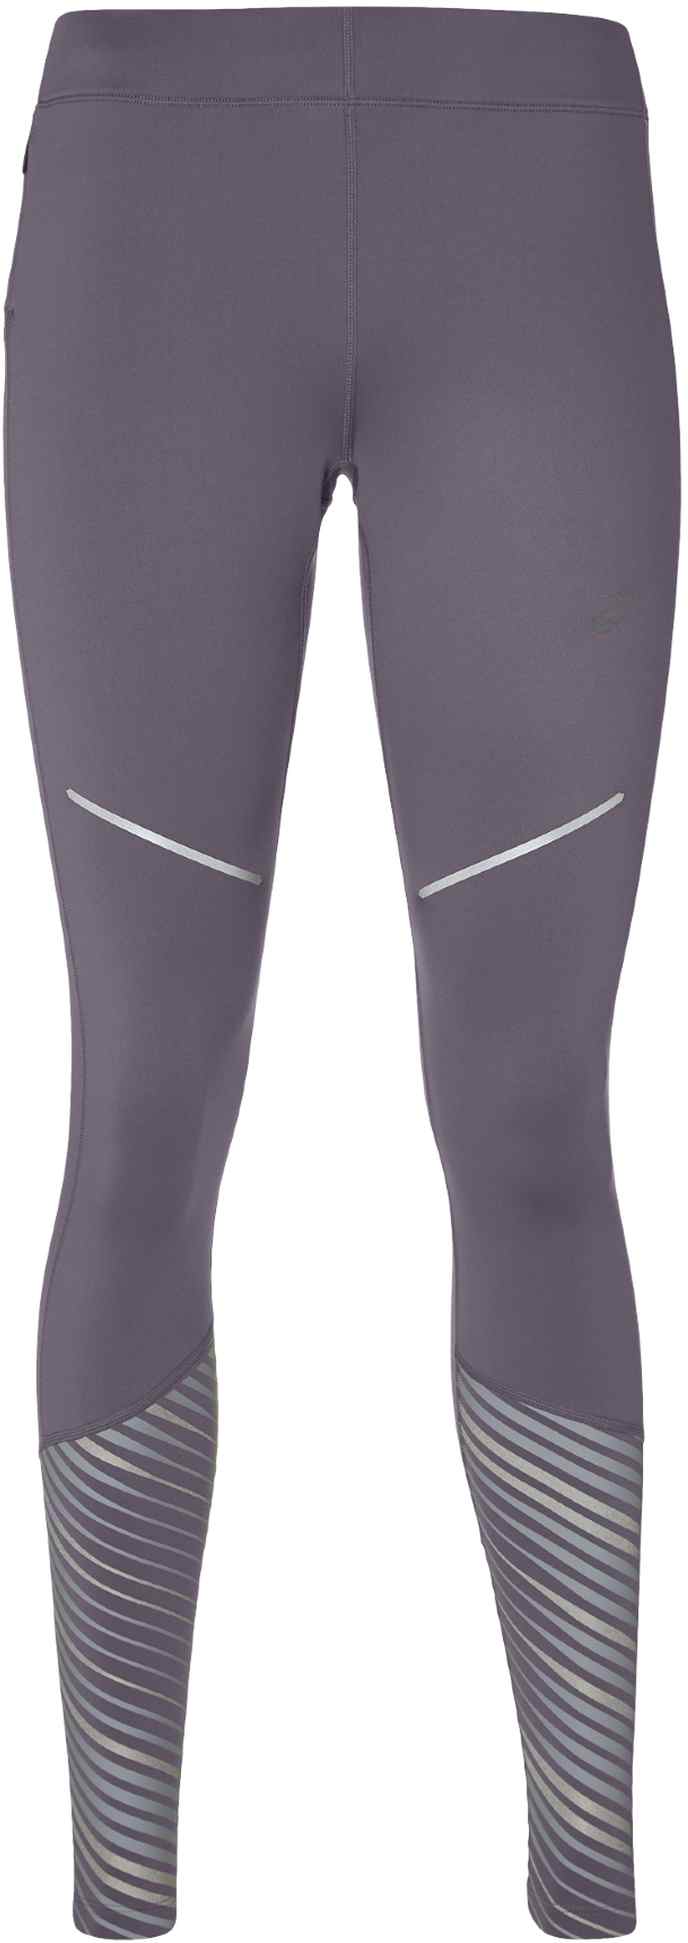 Women’s insulated sports tights